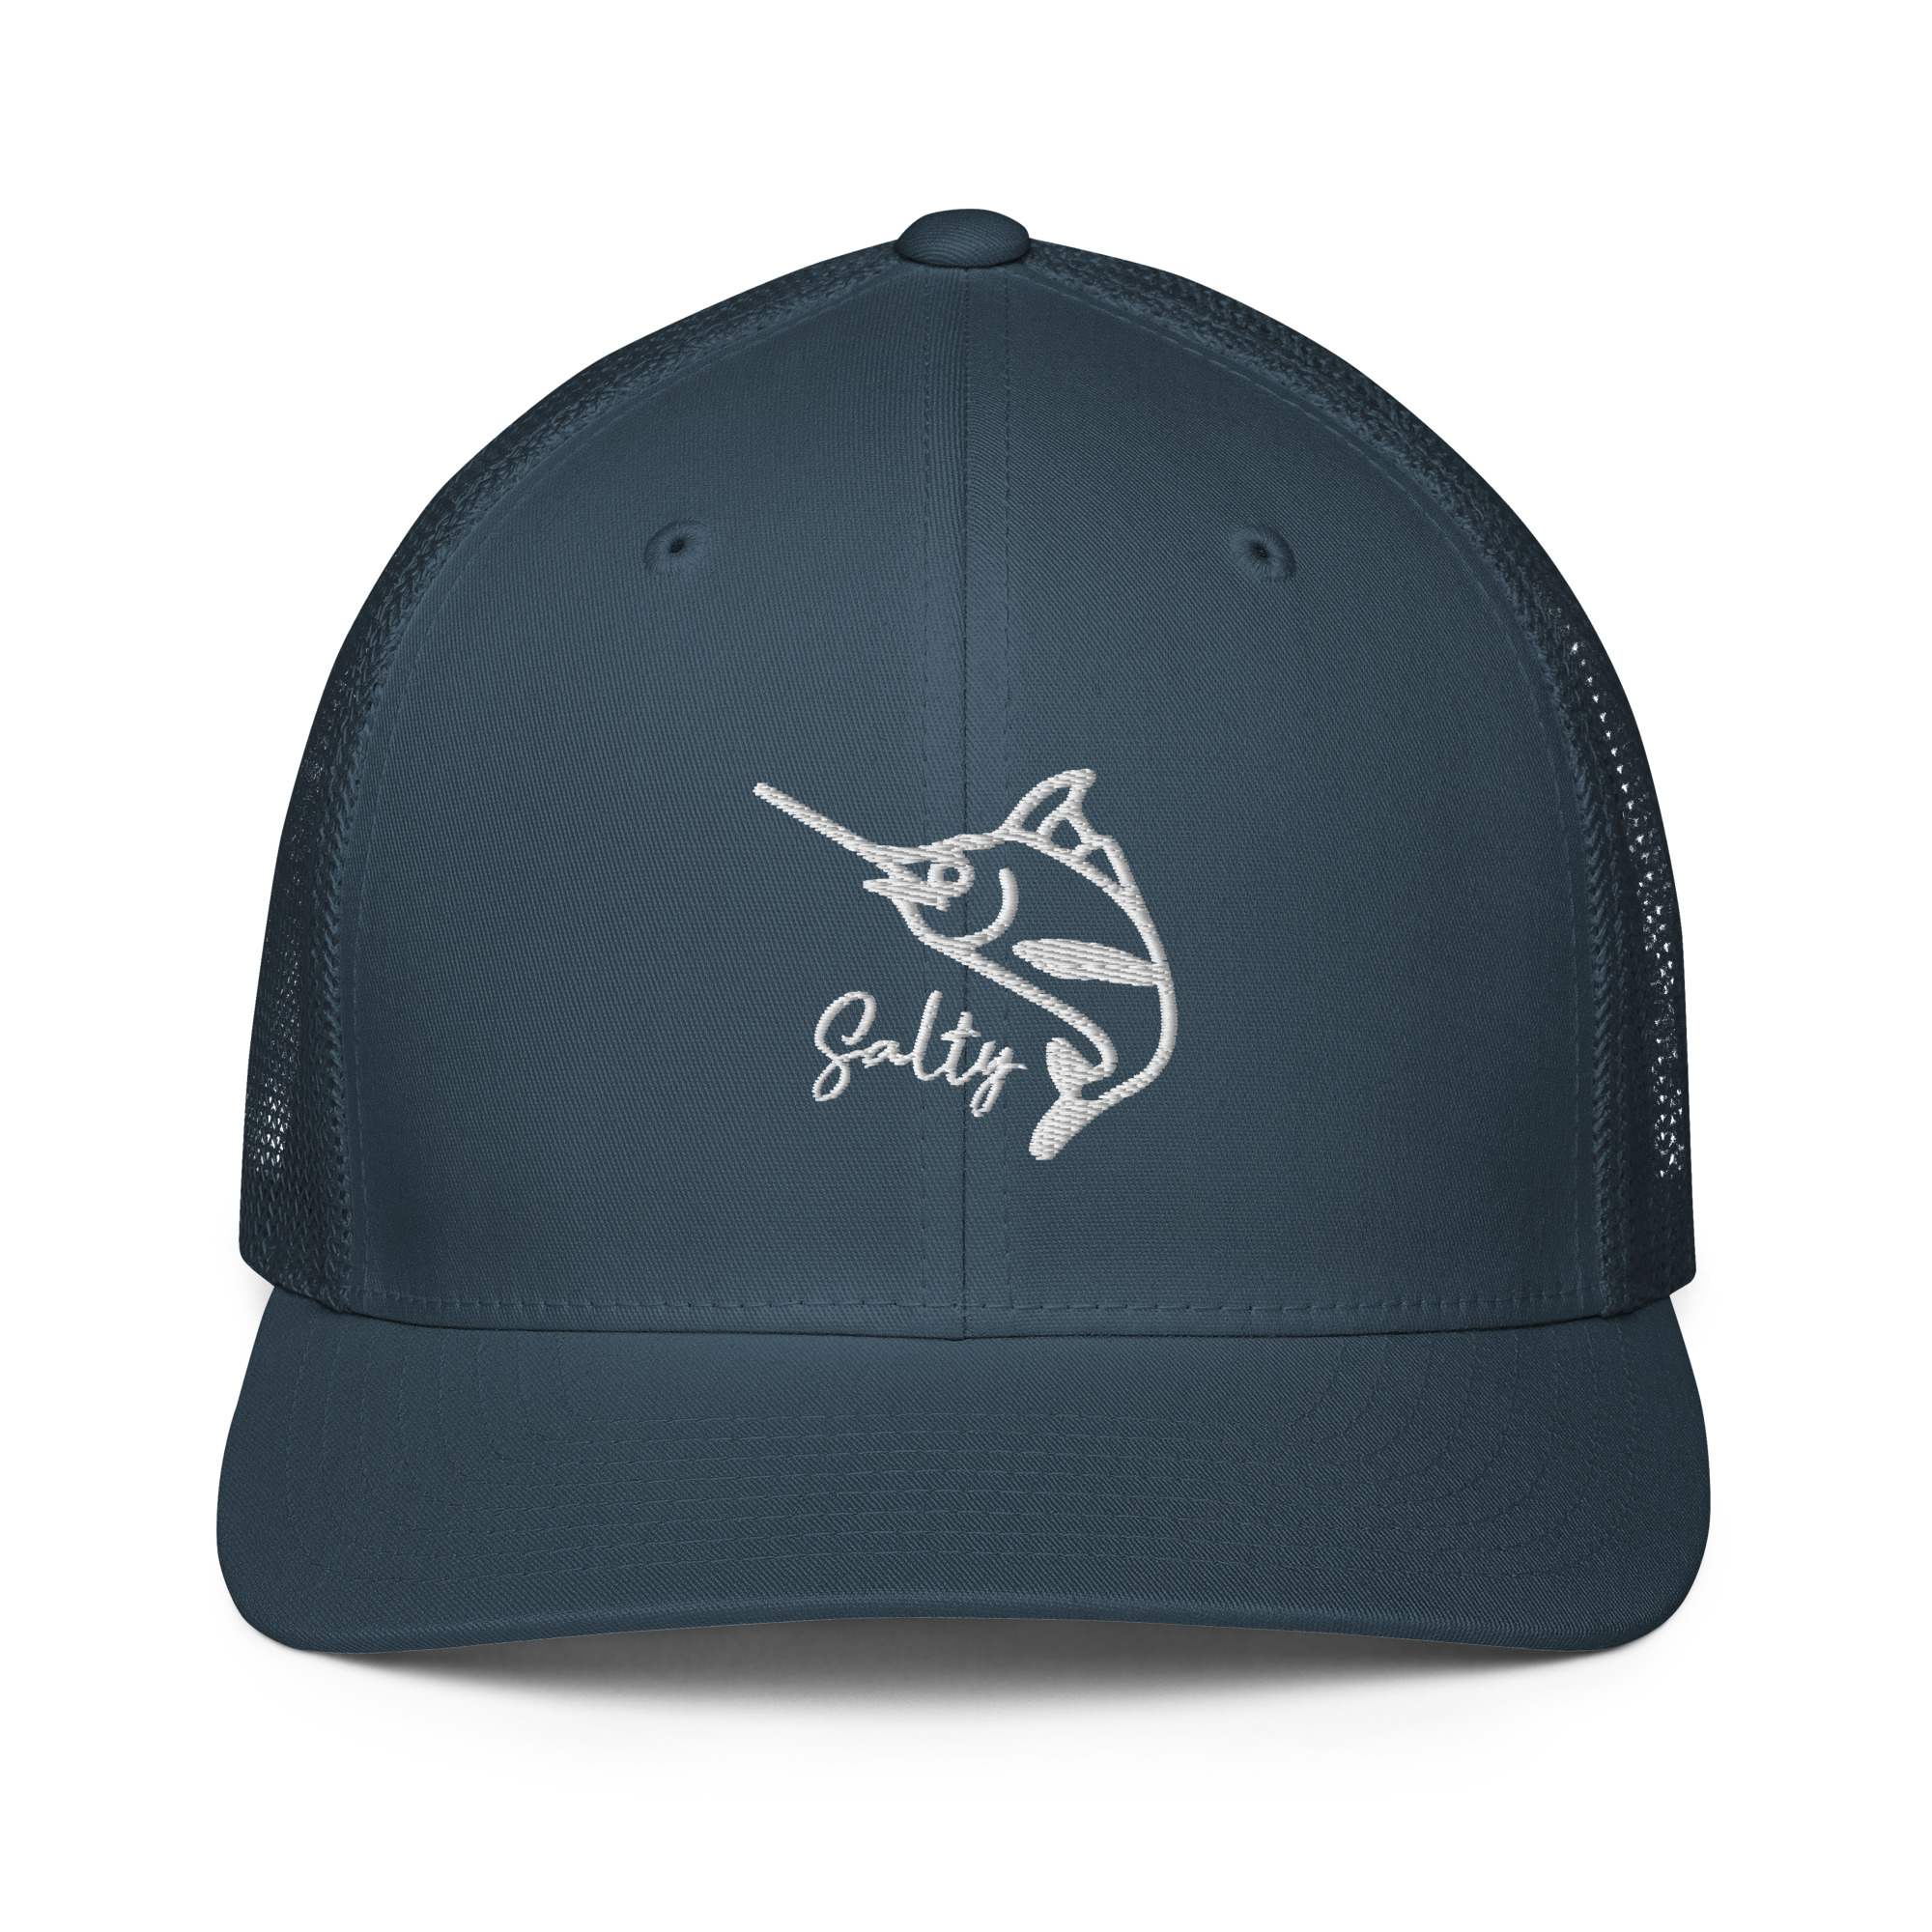 Salty Marlin Closed-back trucker cap - Critical Hat + Clothing Co.